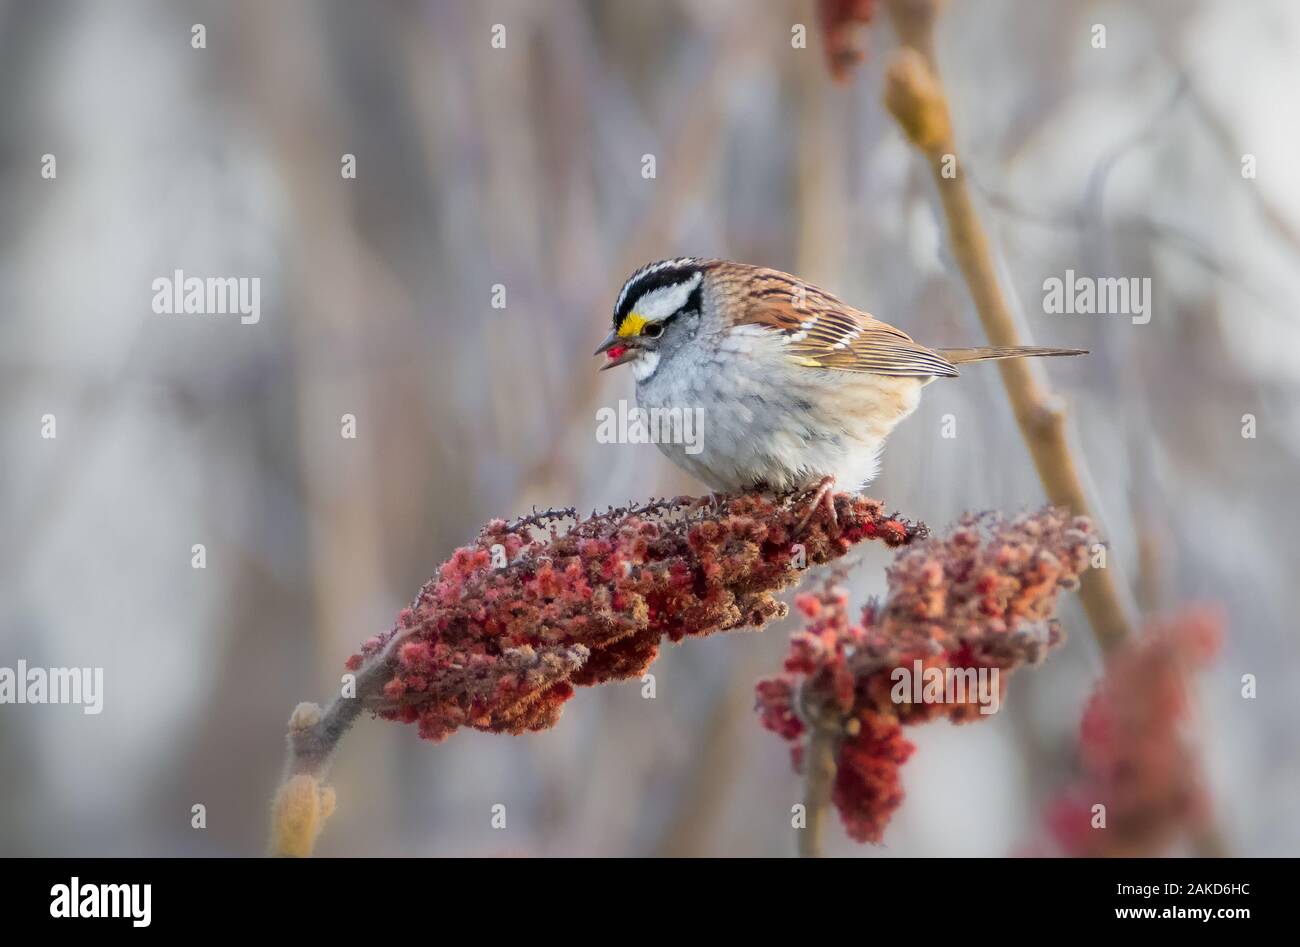 Close up of White-throated Sparrow feeding on red sumac fruits Stock Photo